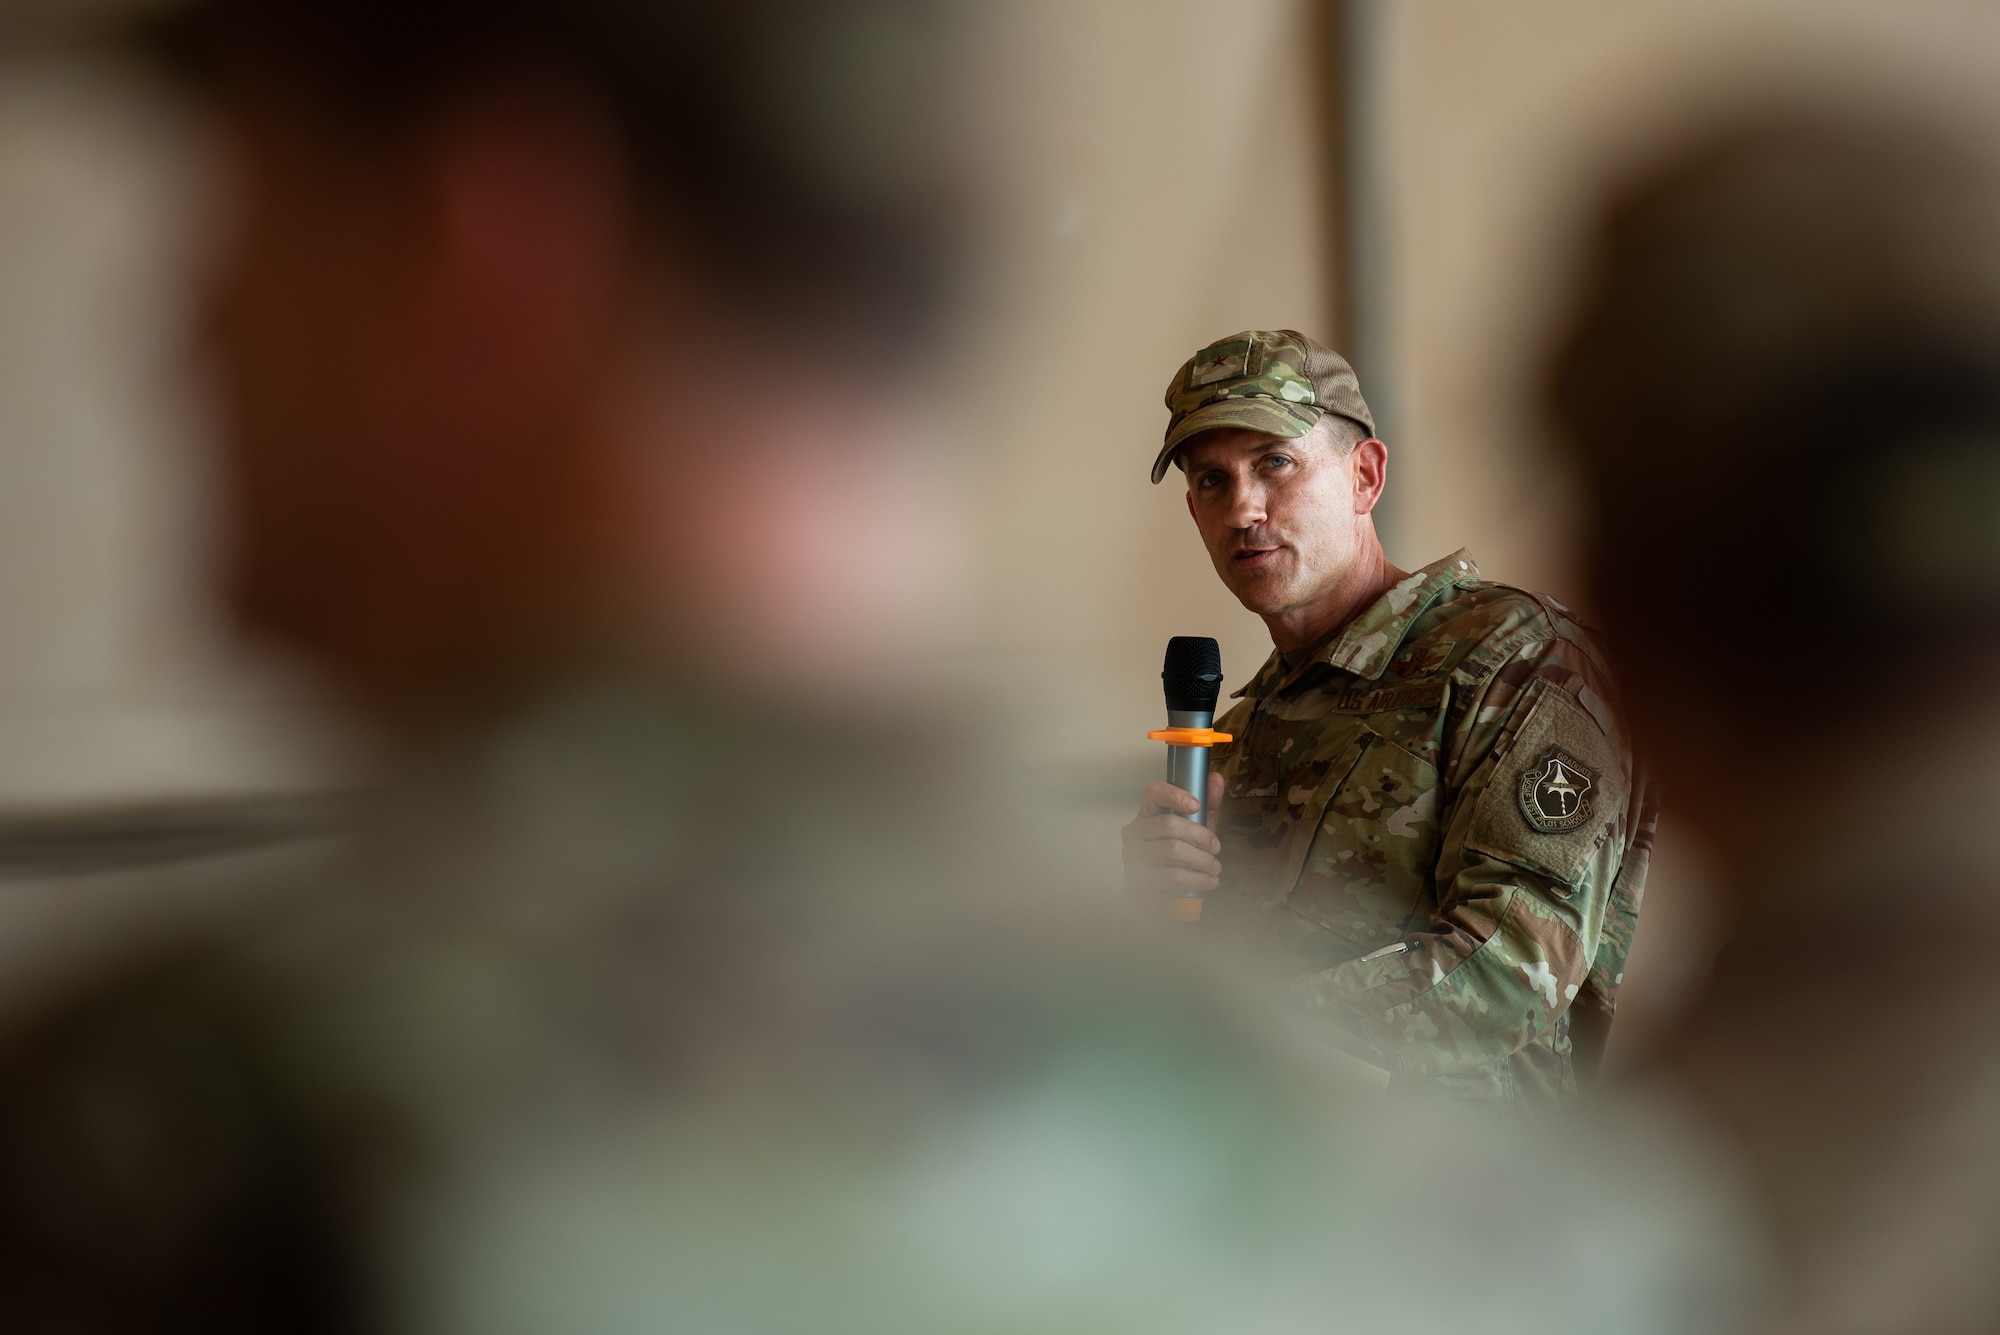 U.S. Air Force Brig. Gen. Michael T. Rawls, 435th Air Ground Operations Wing and 435th Air Expeditionary Wing commander, gives a speech during the 409th Air Expeditionary Group change of command ceremony at Air Base 201, Niger, June 28, 2019. Rawls spoke about the tremendous accomplishments and hurdles the commanders and their Airmen overcame to keep the base running in an austere environment. (U.S. Air Force photo by Staff Sgt. Devin Boyer)